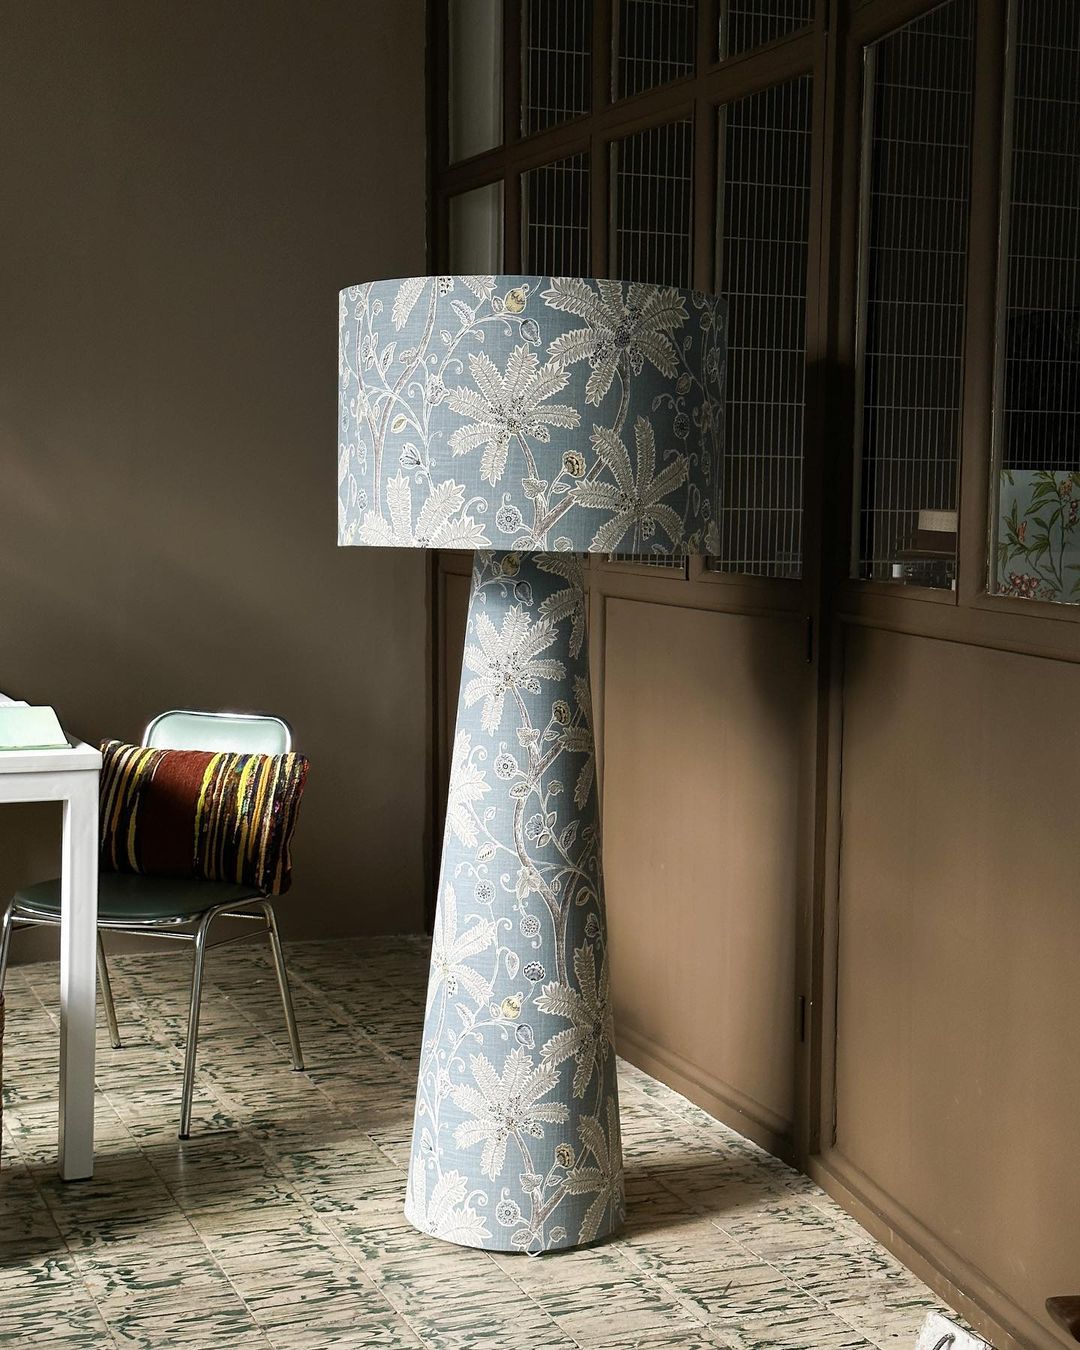 Solano Lamps dress their floor lamps with prints, patterns, and colors to suit their clients' individual tastes.